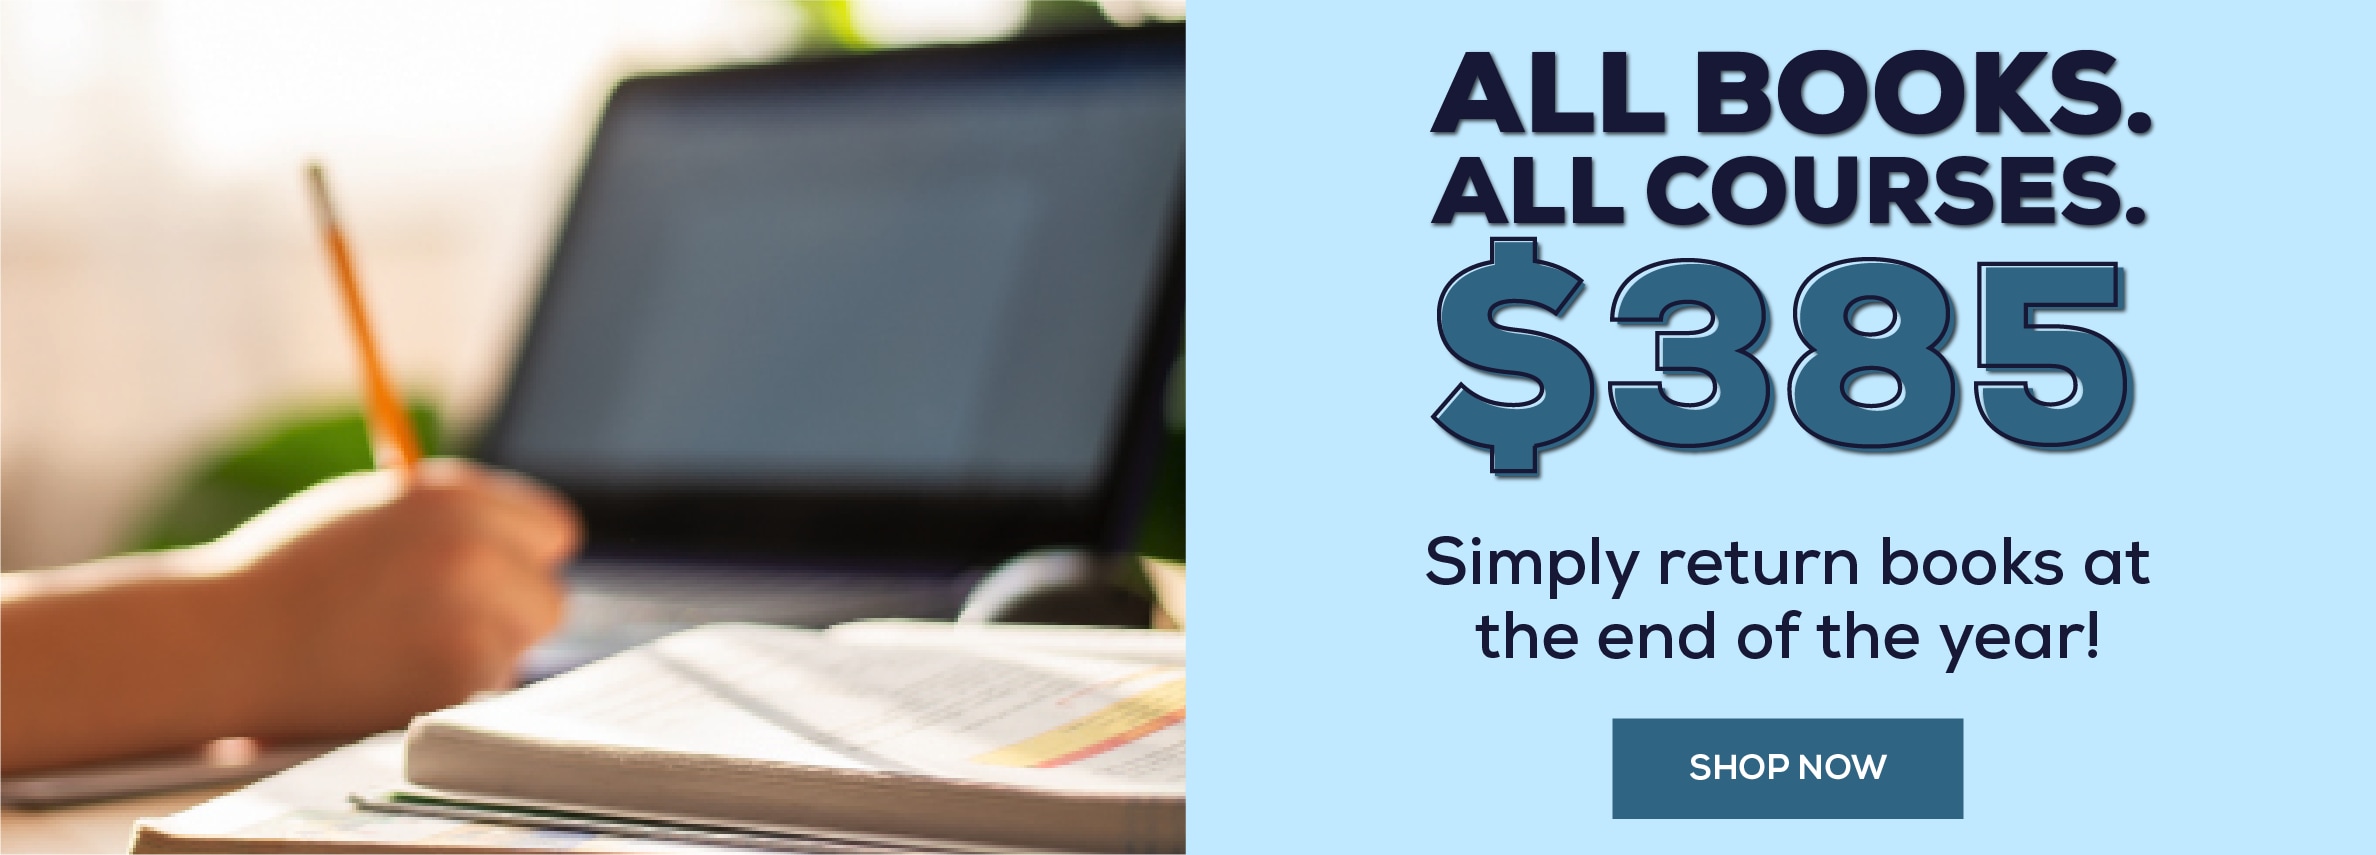 All Books. All Course. $385 Bundle. Simply return books at the end of the year! Shop now